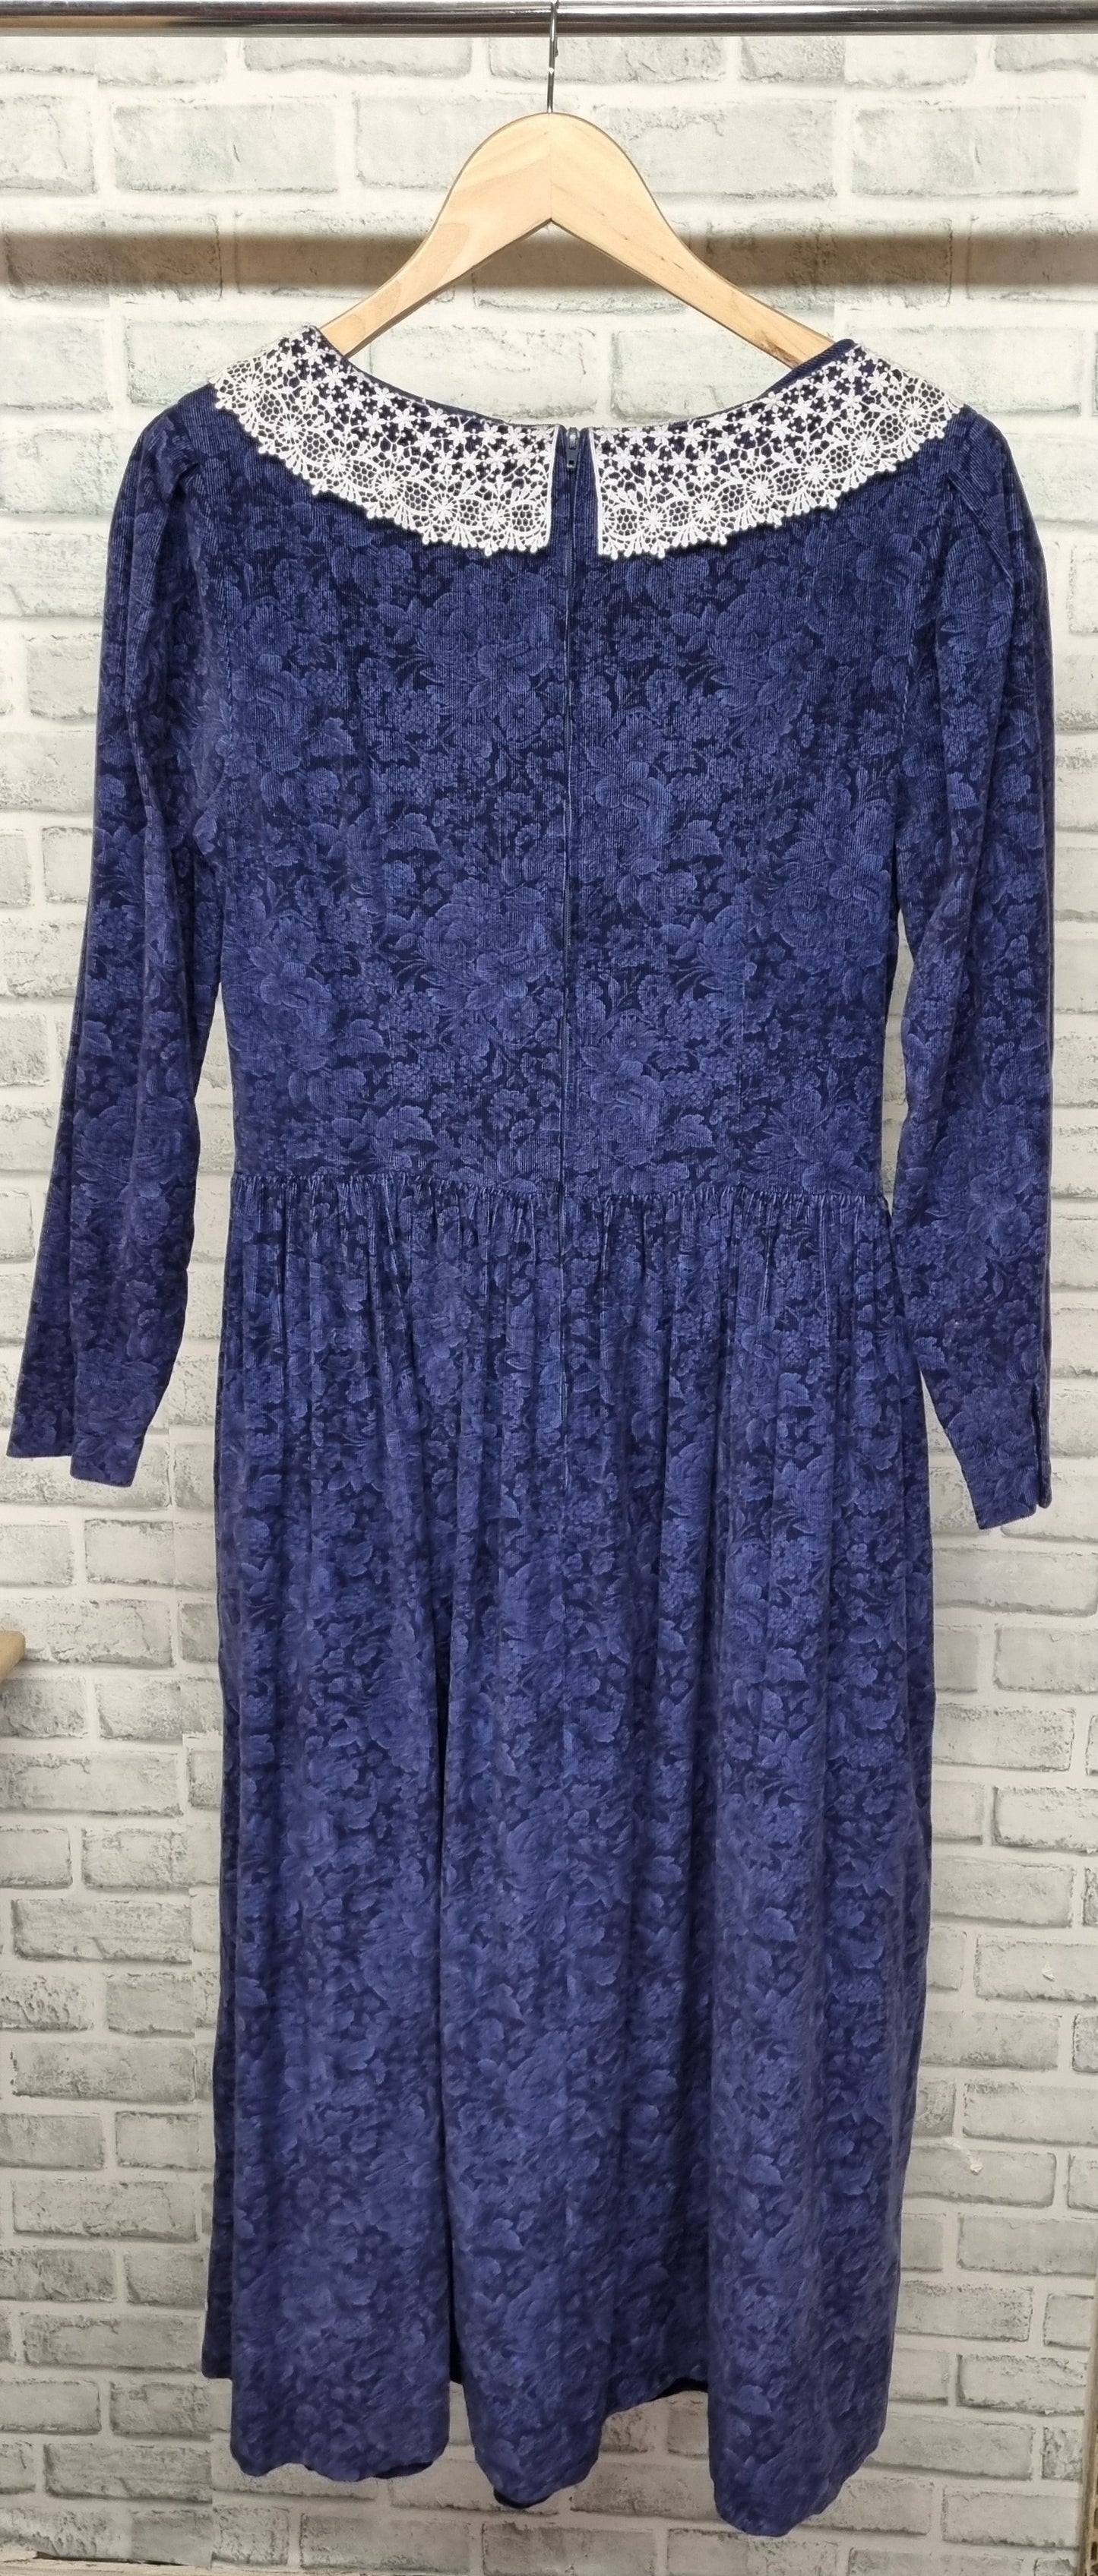 Vintage Laura Ashley Floral Blue Maxi Prairie Dress with Lace Peter Pan Collar Size 14